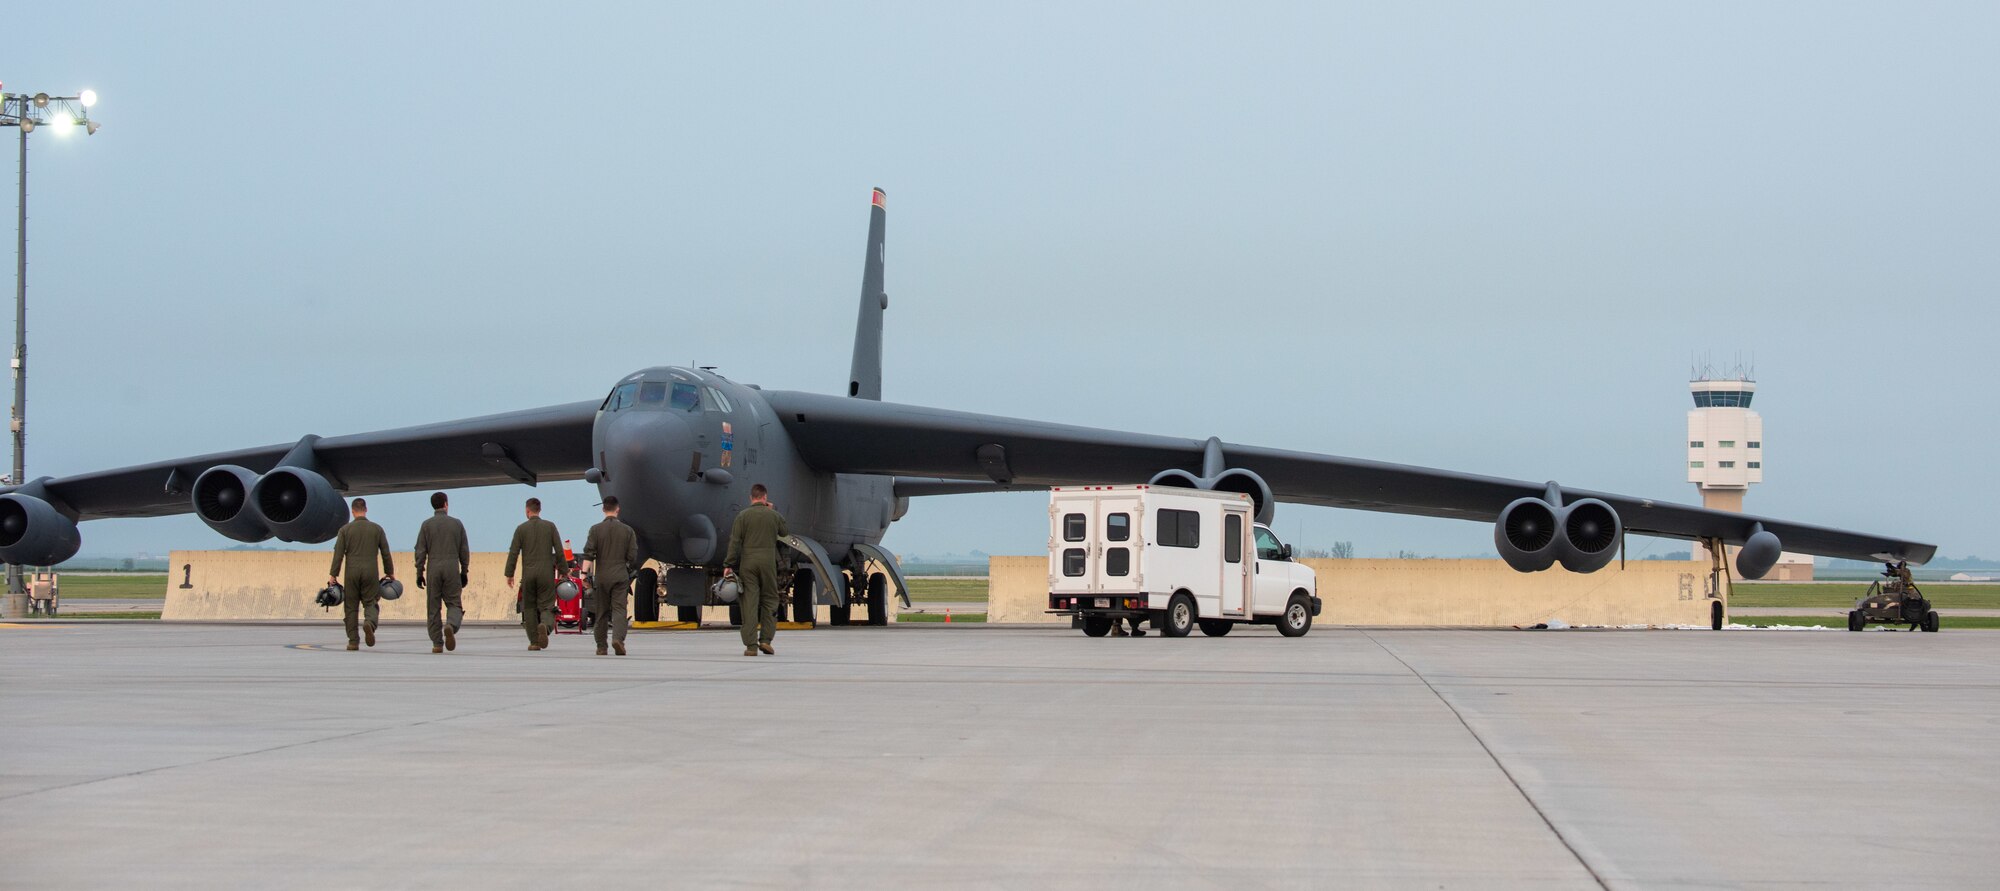 A B-52H Stratofortress assigned to the 5th Bomb Wing, prepares to take-off at Minot Air Force Base, North Dakota, July 14, 2021. Strategic bomber missions enhance the readiness and training necessary to respond to any potential crisis or challenge across the globe. (U.S. Air Force photo by Senior Airman Jesse Jenny)